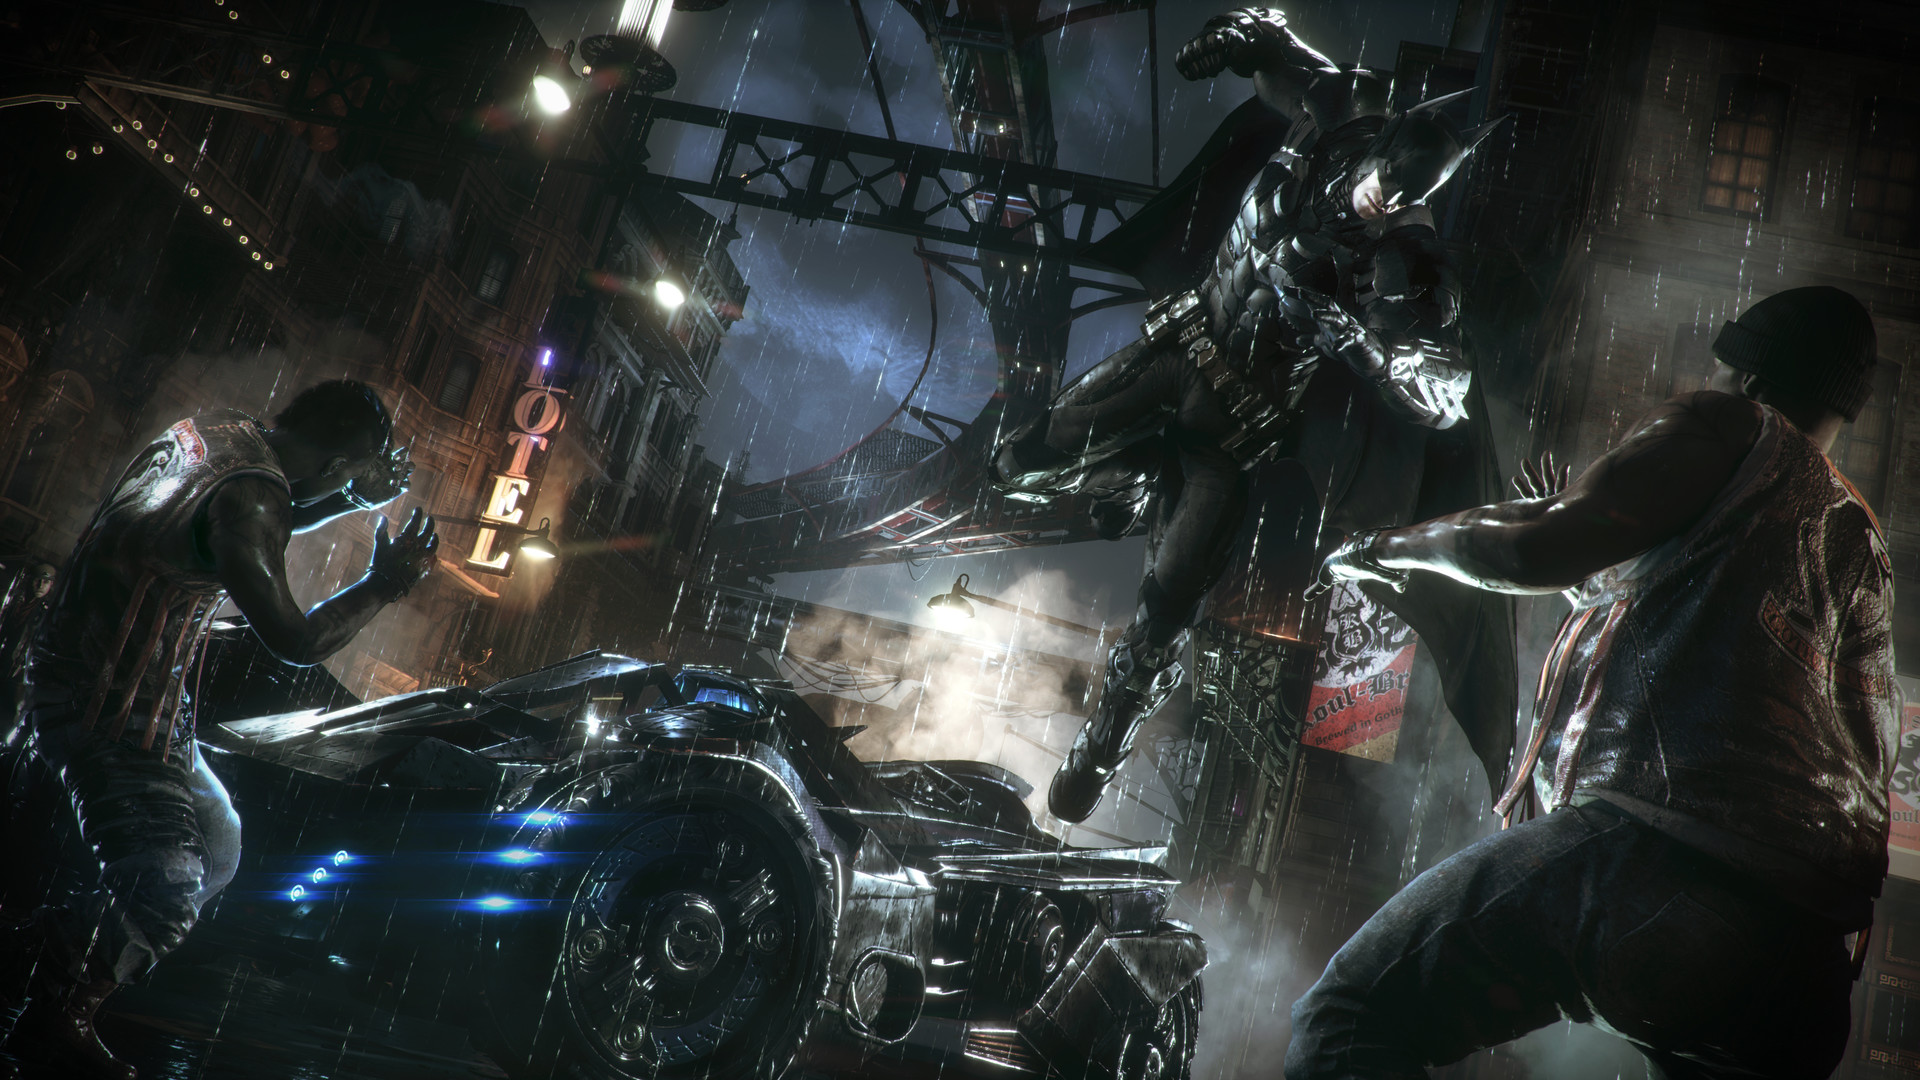 Batman: Arkham Knight' was the biggest AAA screwup of 2015 - SiliconANGLE